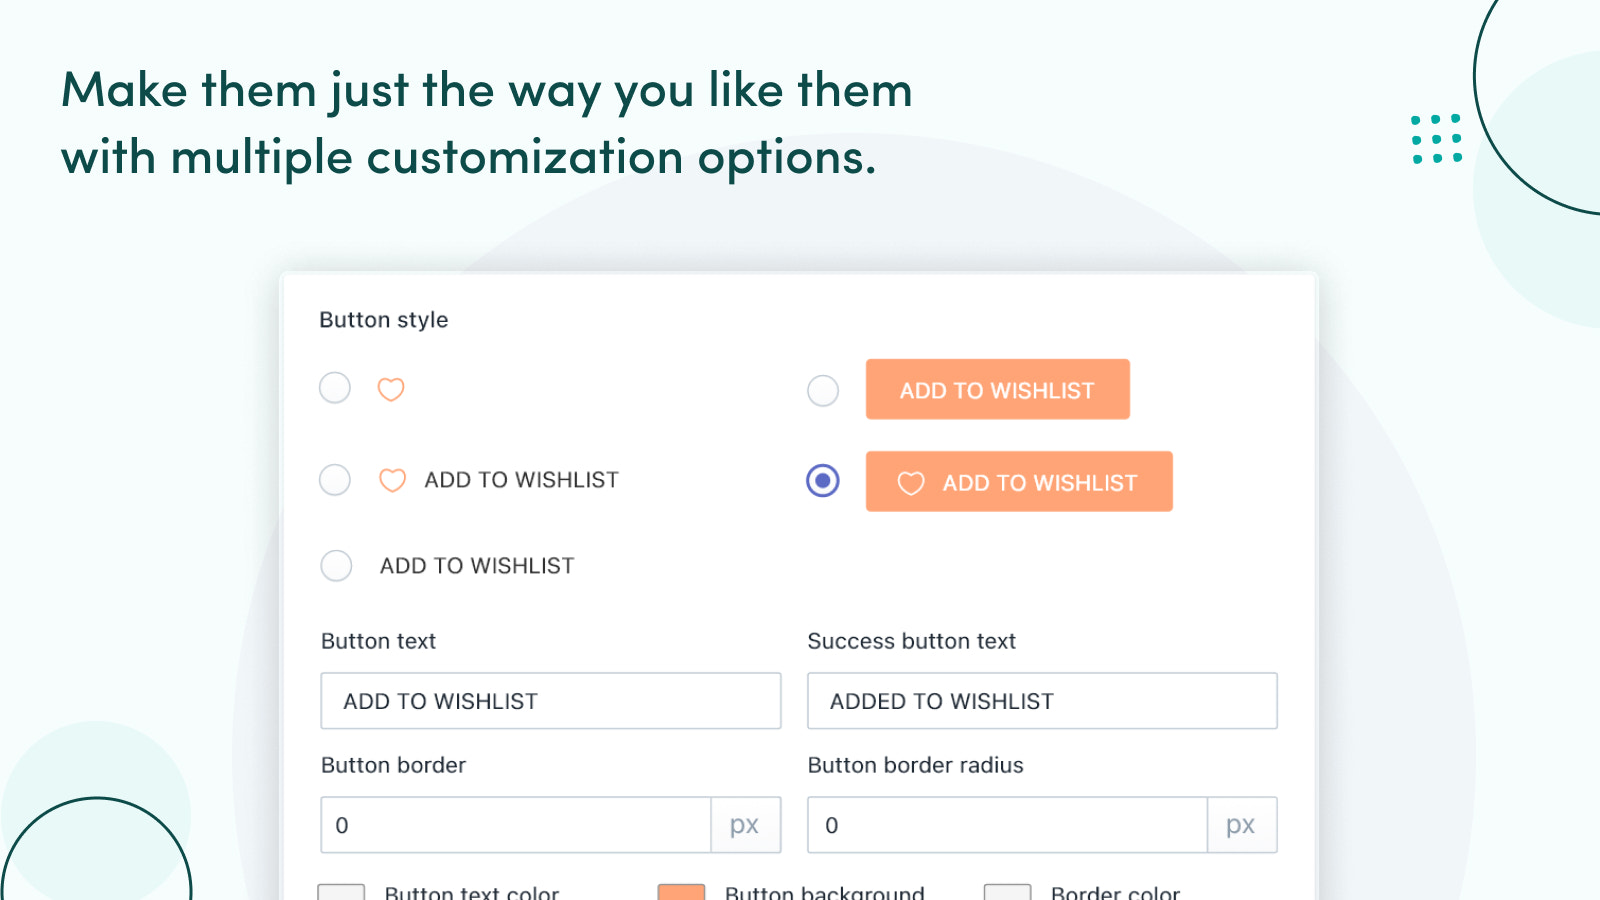 Numerous wishlist page customizations for wishlist buttons.